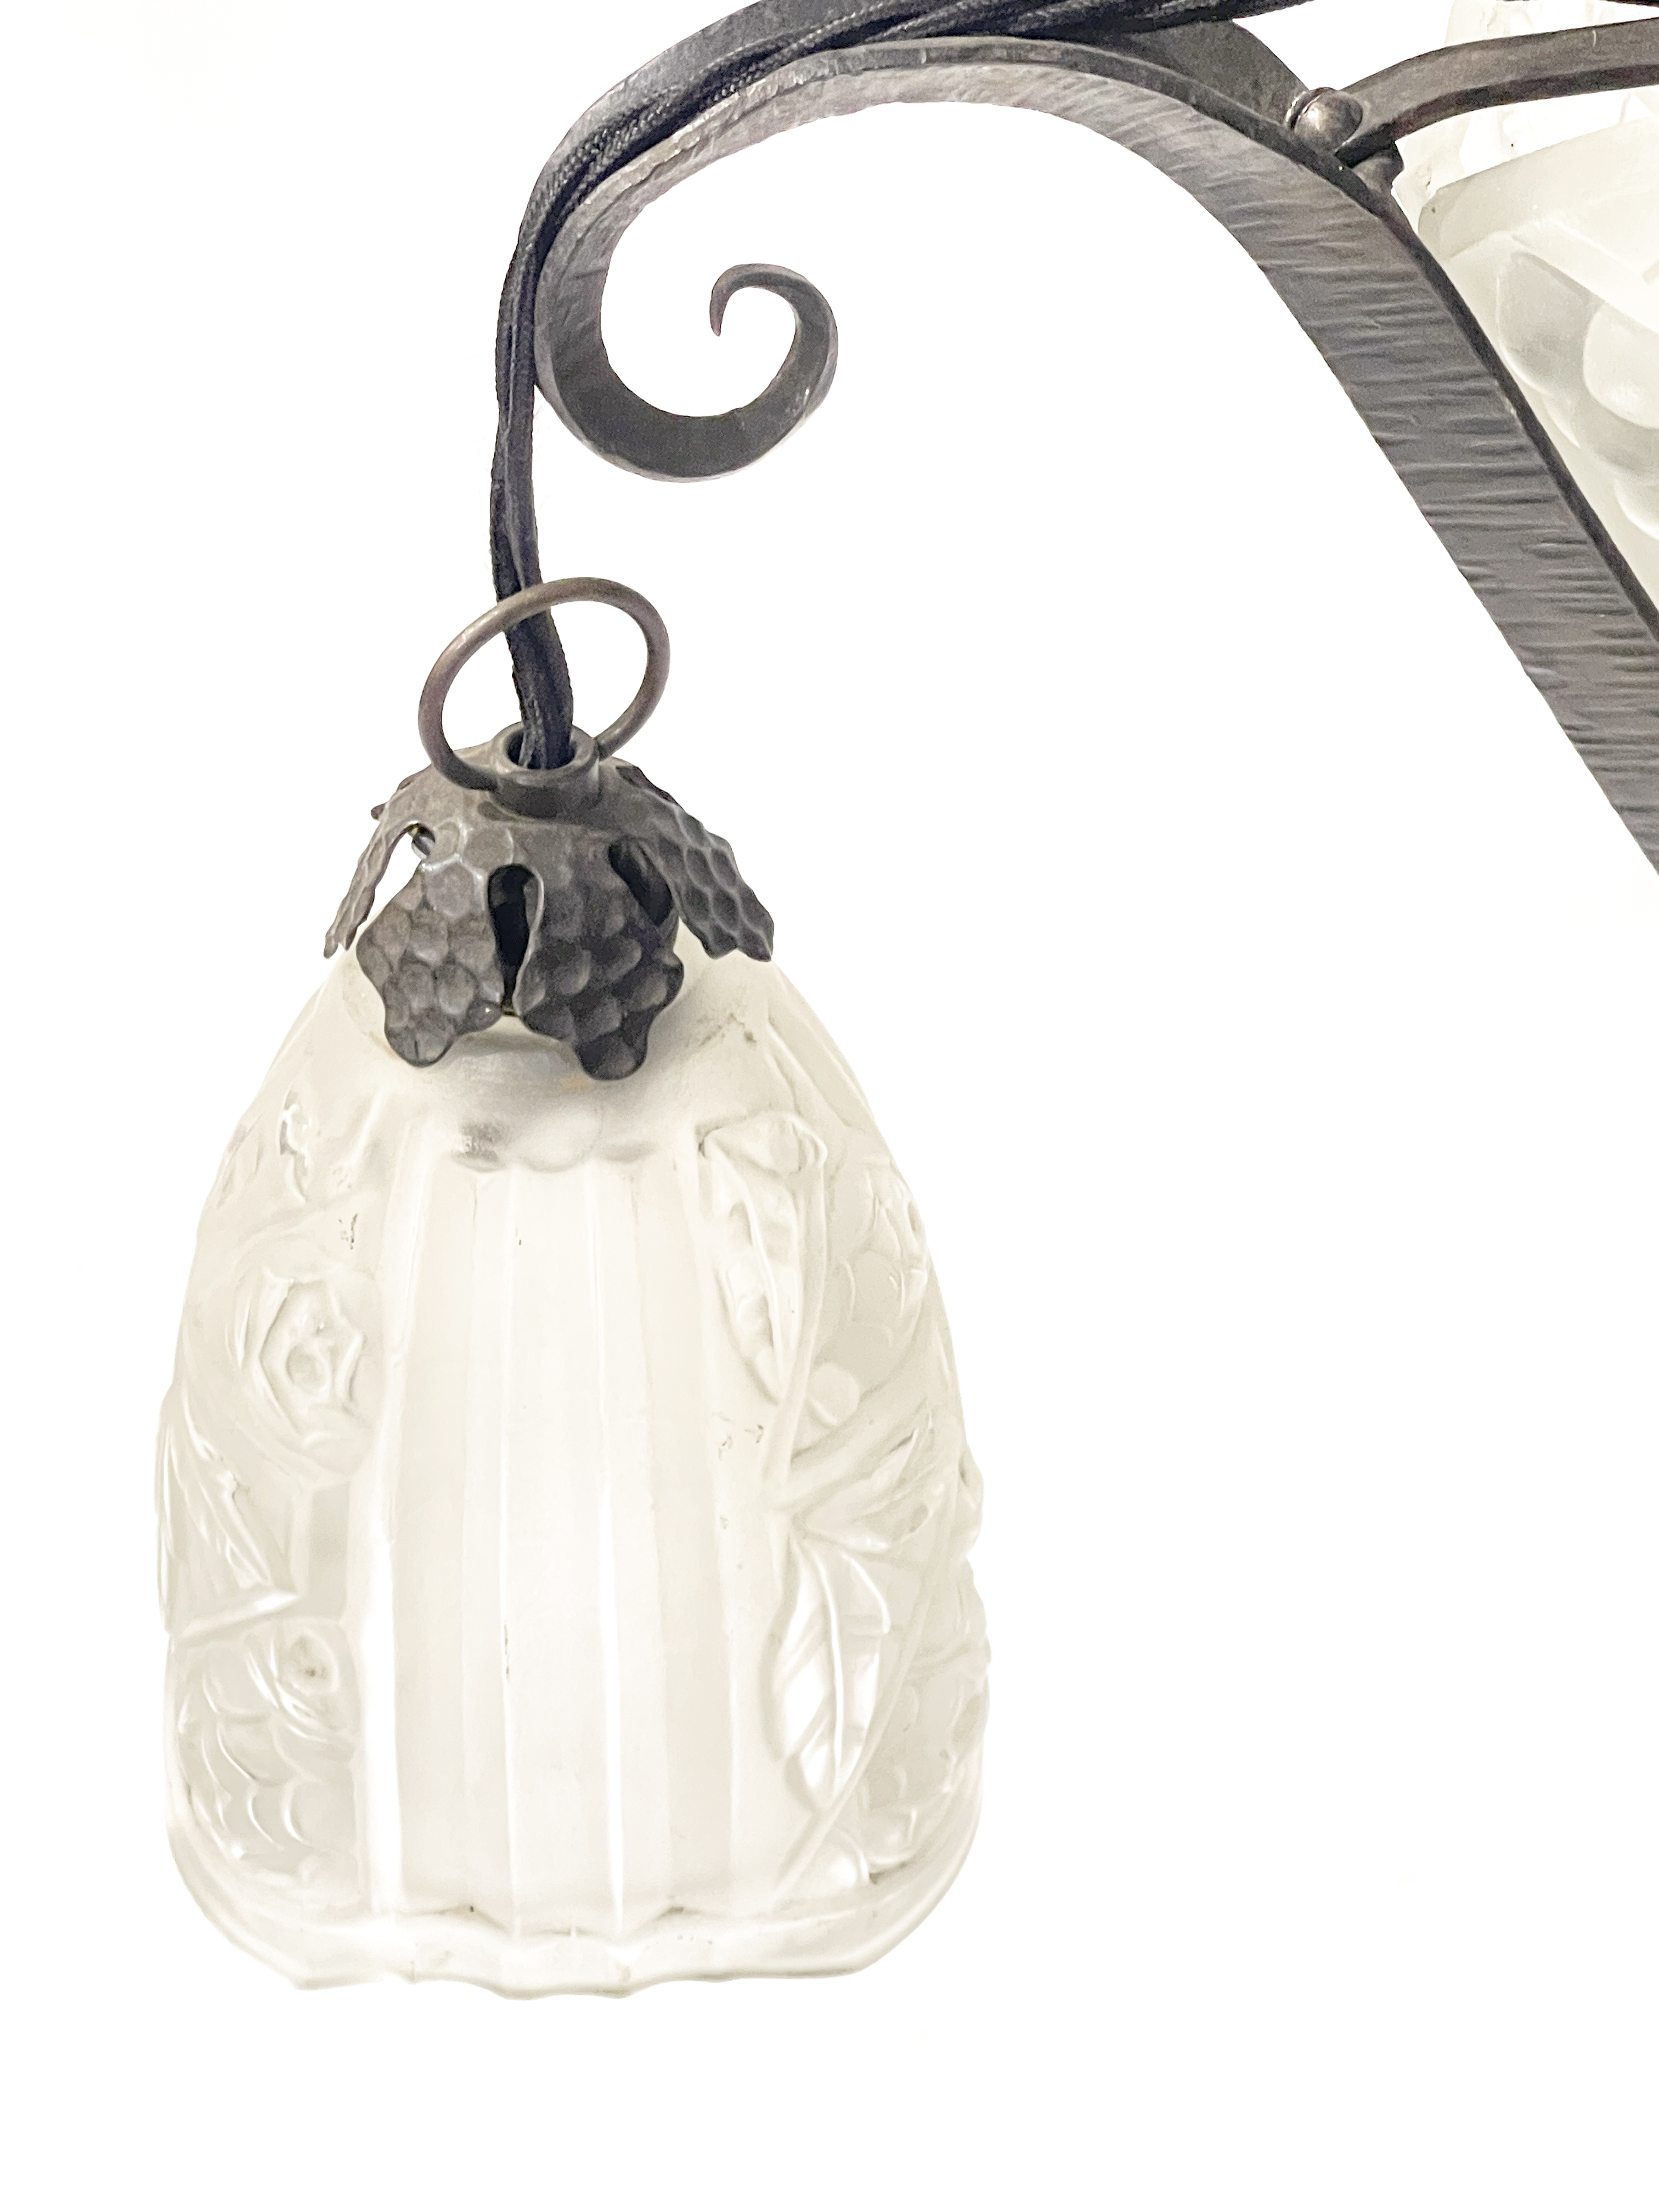 Degue, a French Art Deco glass light shade, bell form with floral design - Image 3 of 3